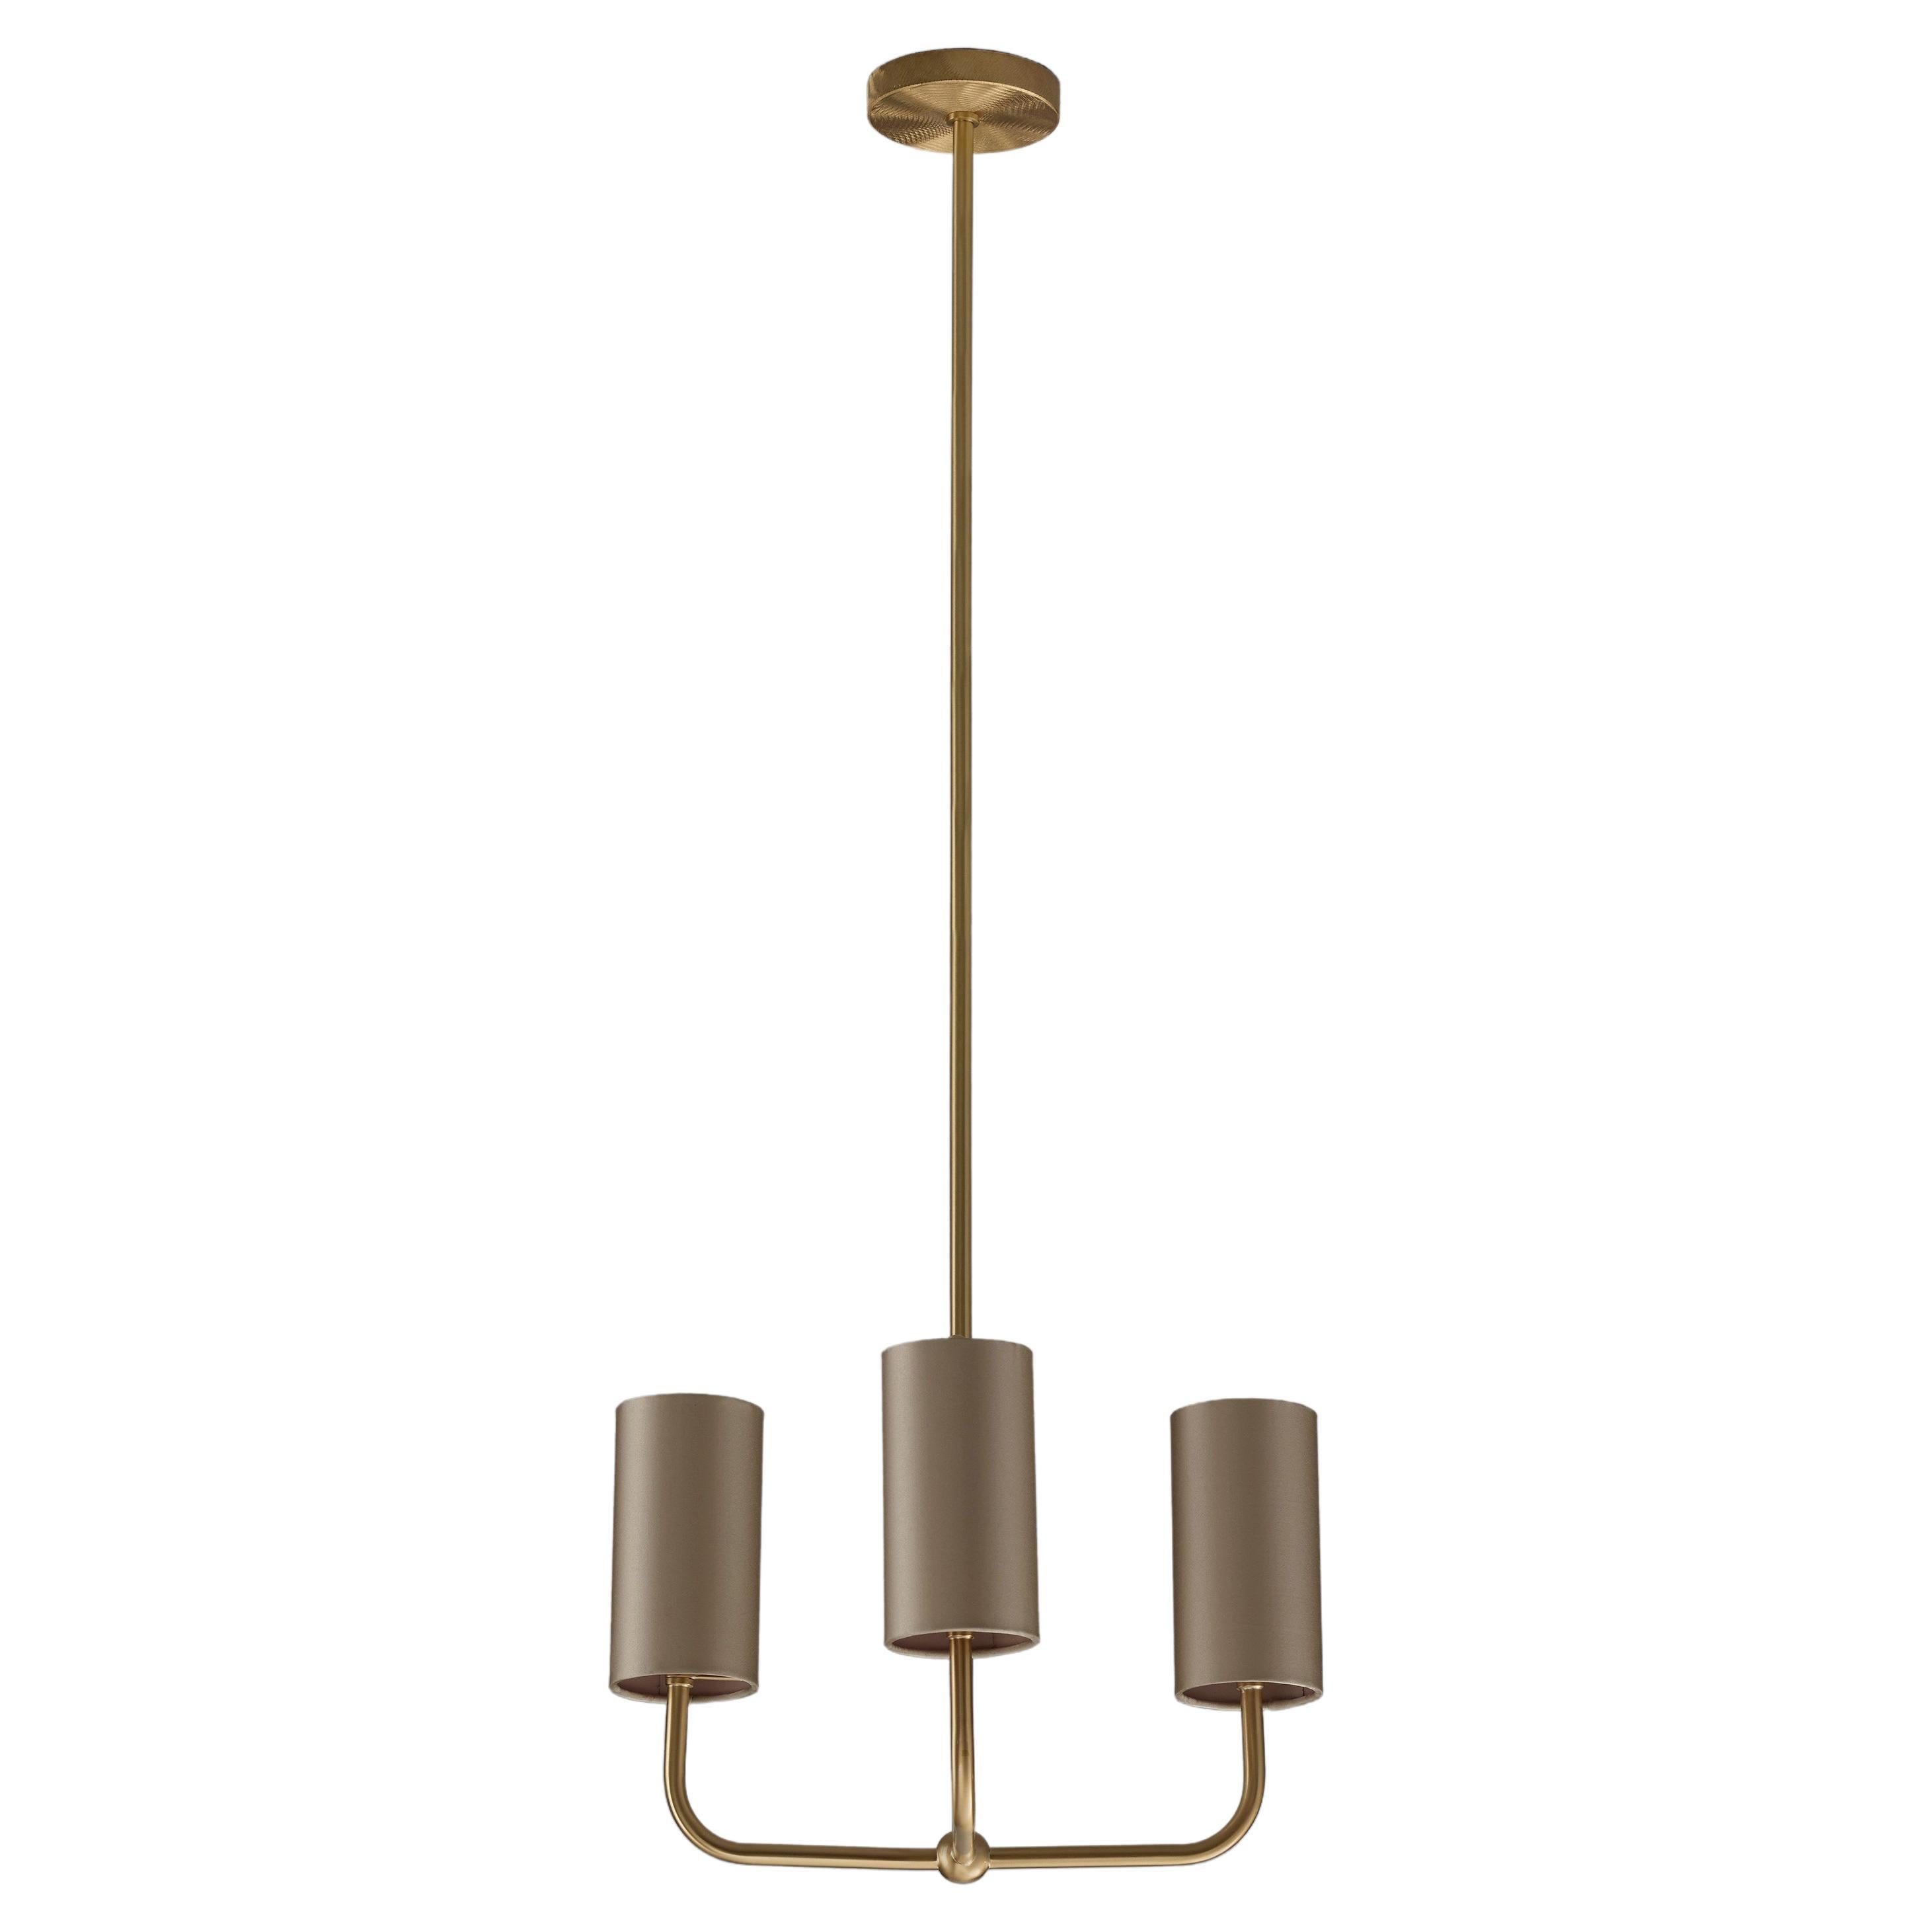 Imagin Classic Pendant Light 2 in Brushed Brass and Fabric Shade